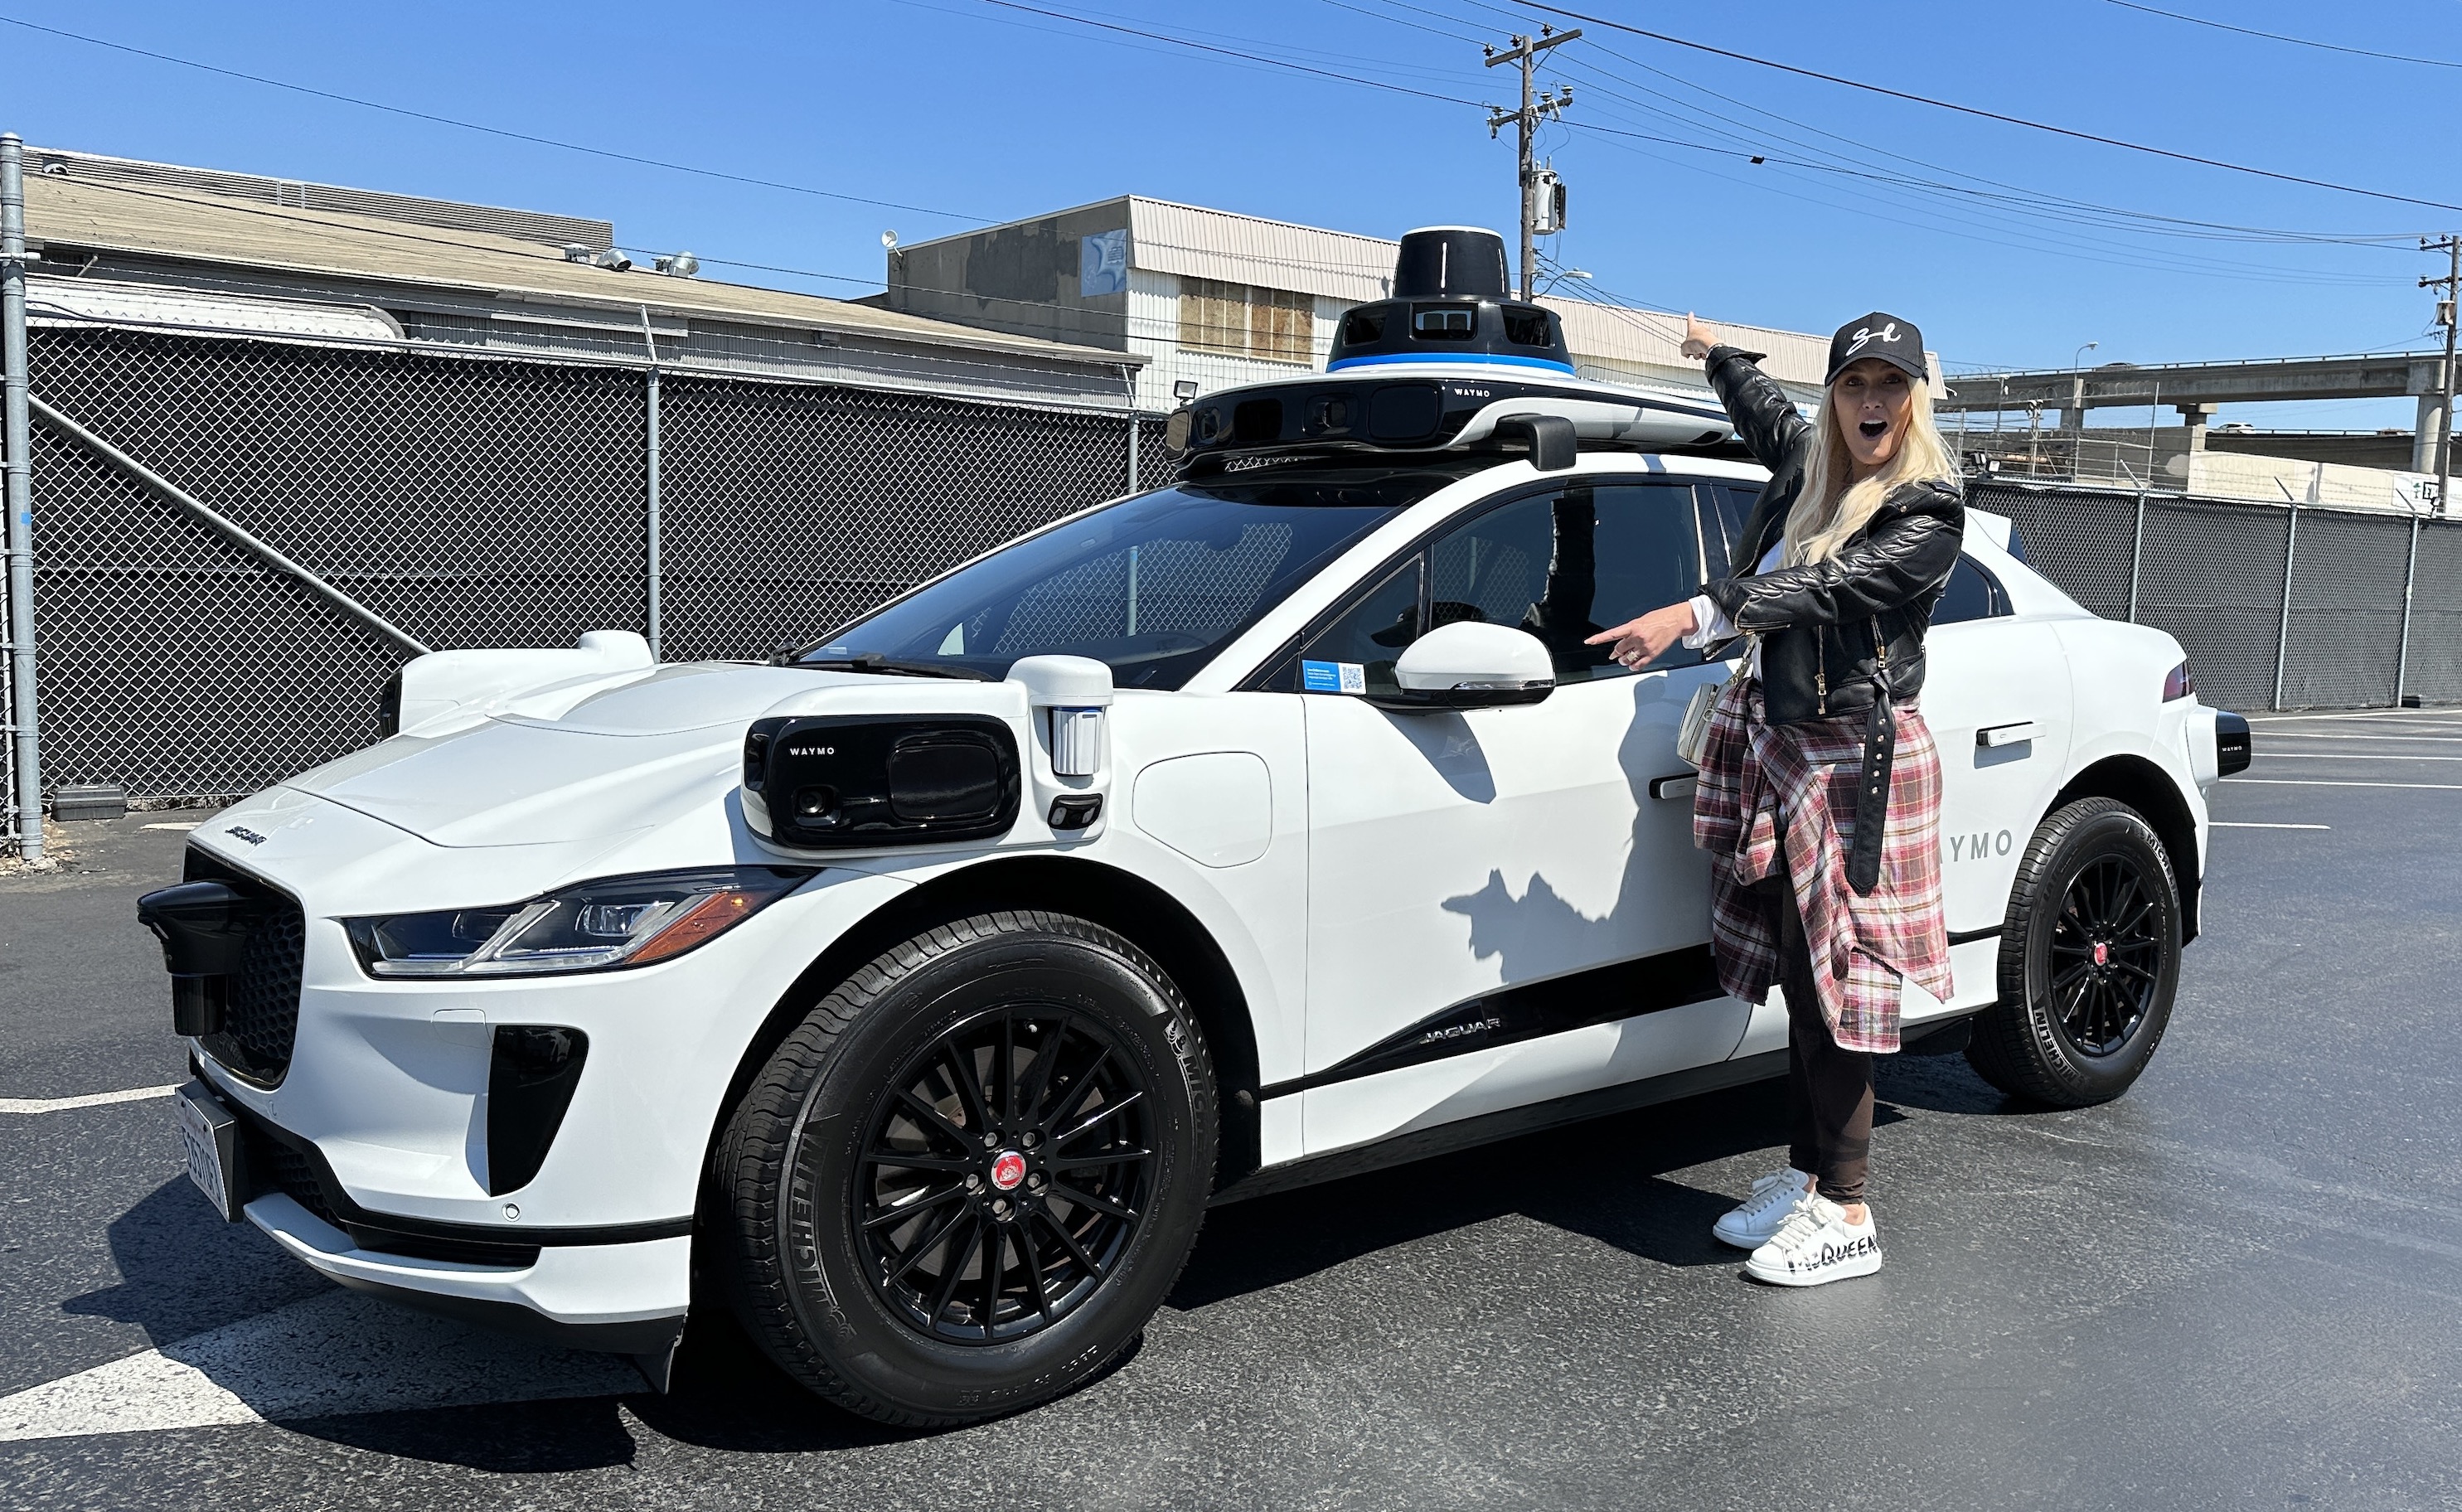 Waymo self-driving cars are about to take over your city